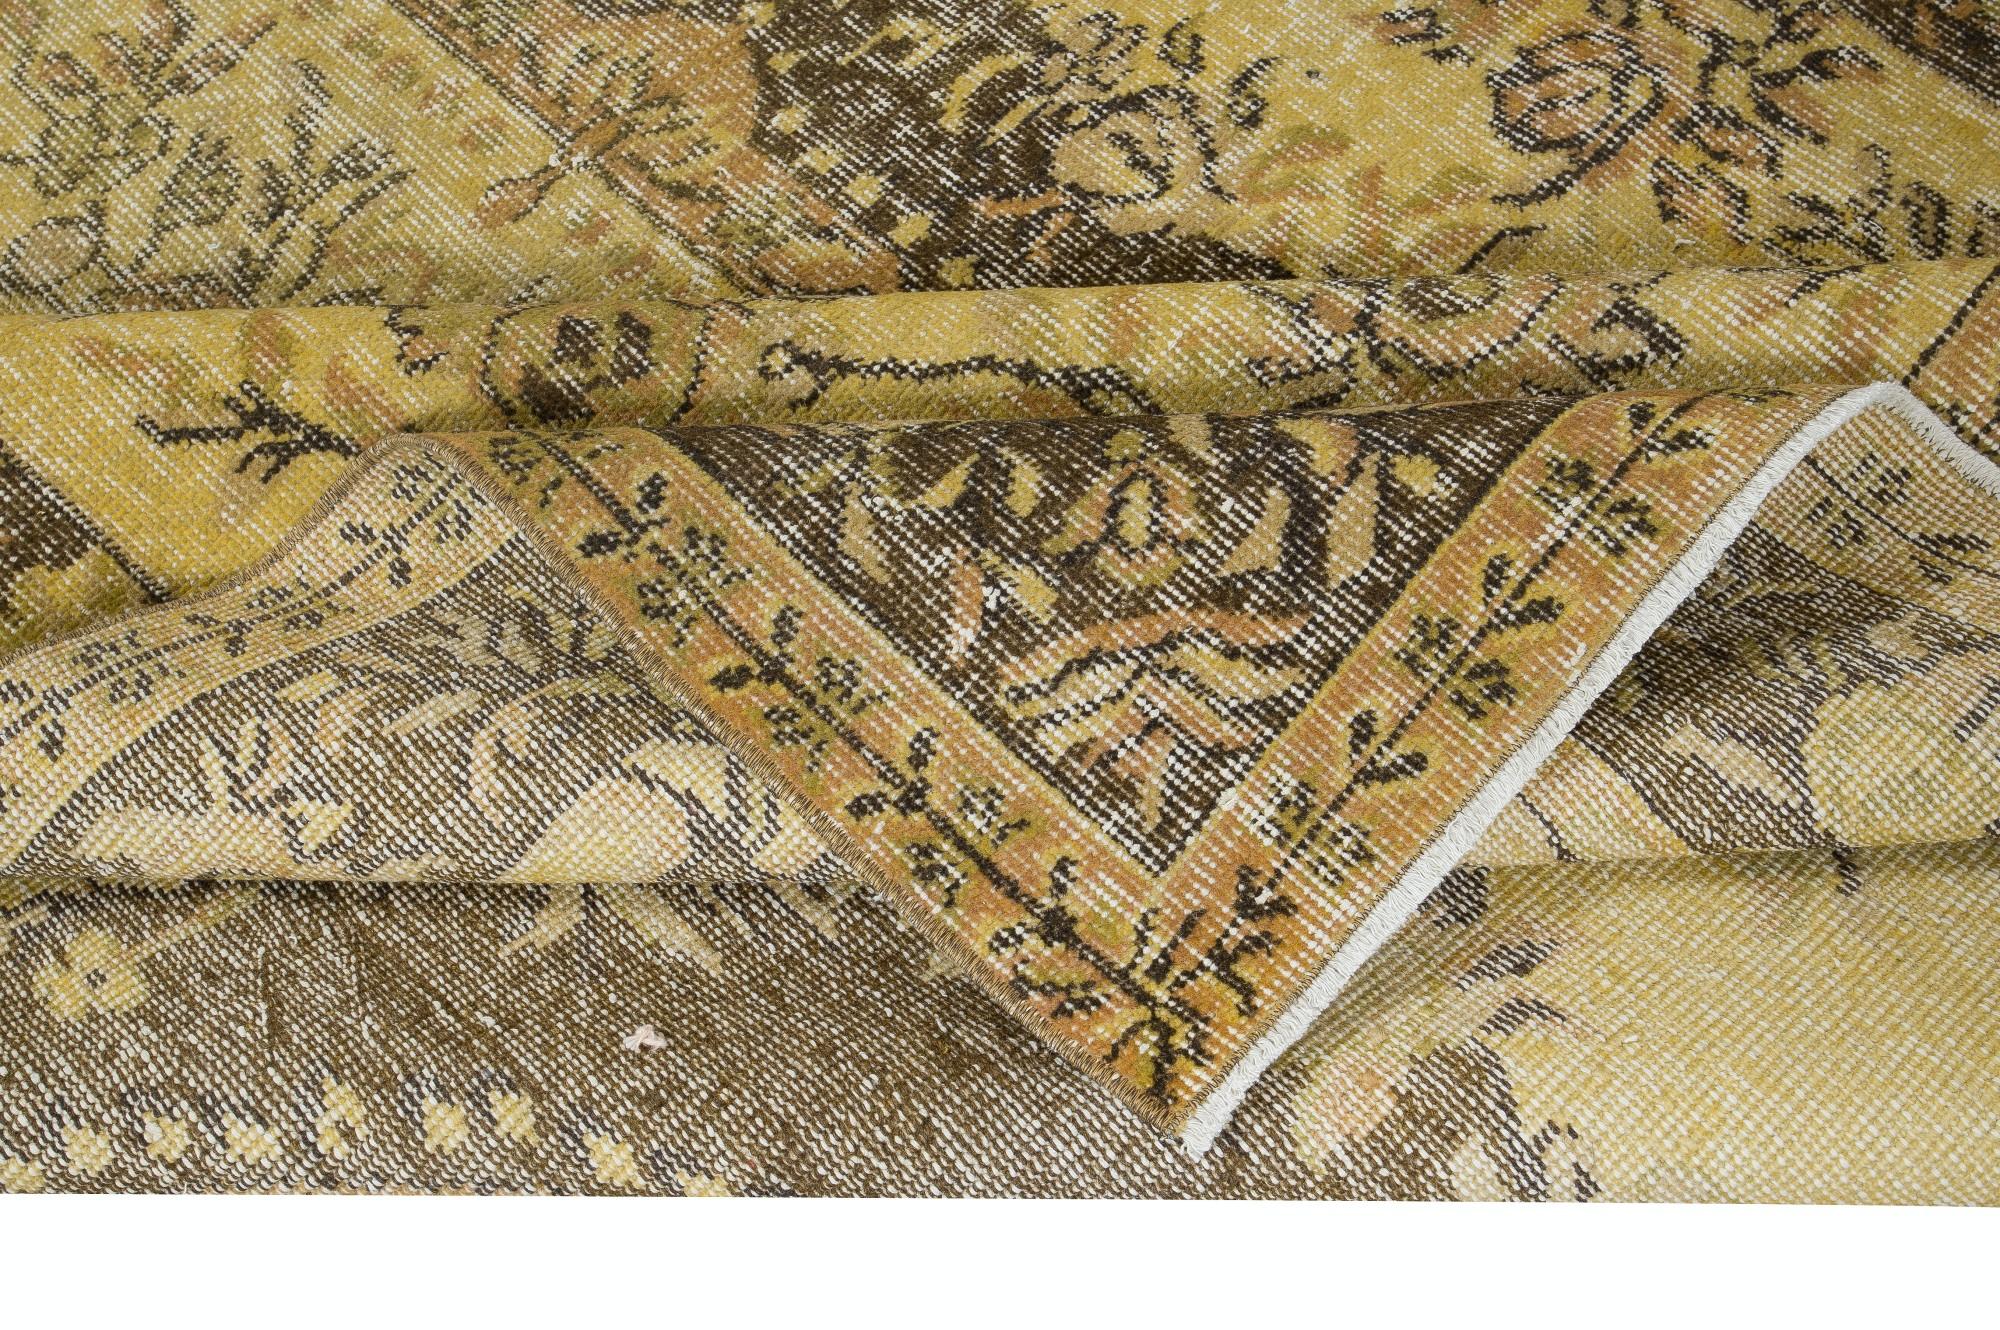 5.8x9.6 Ft Classic Aubusson Inspired Handmade Turkish Rug in Soft Yellow & Brown In Good Condition For Sale In Philadelphia, PA